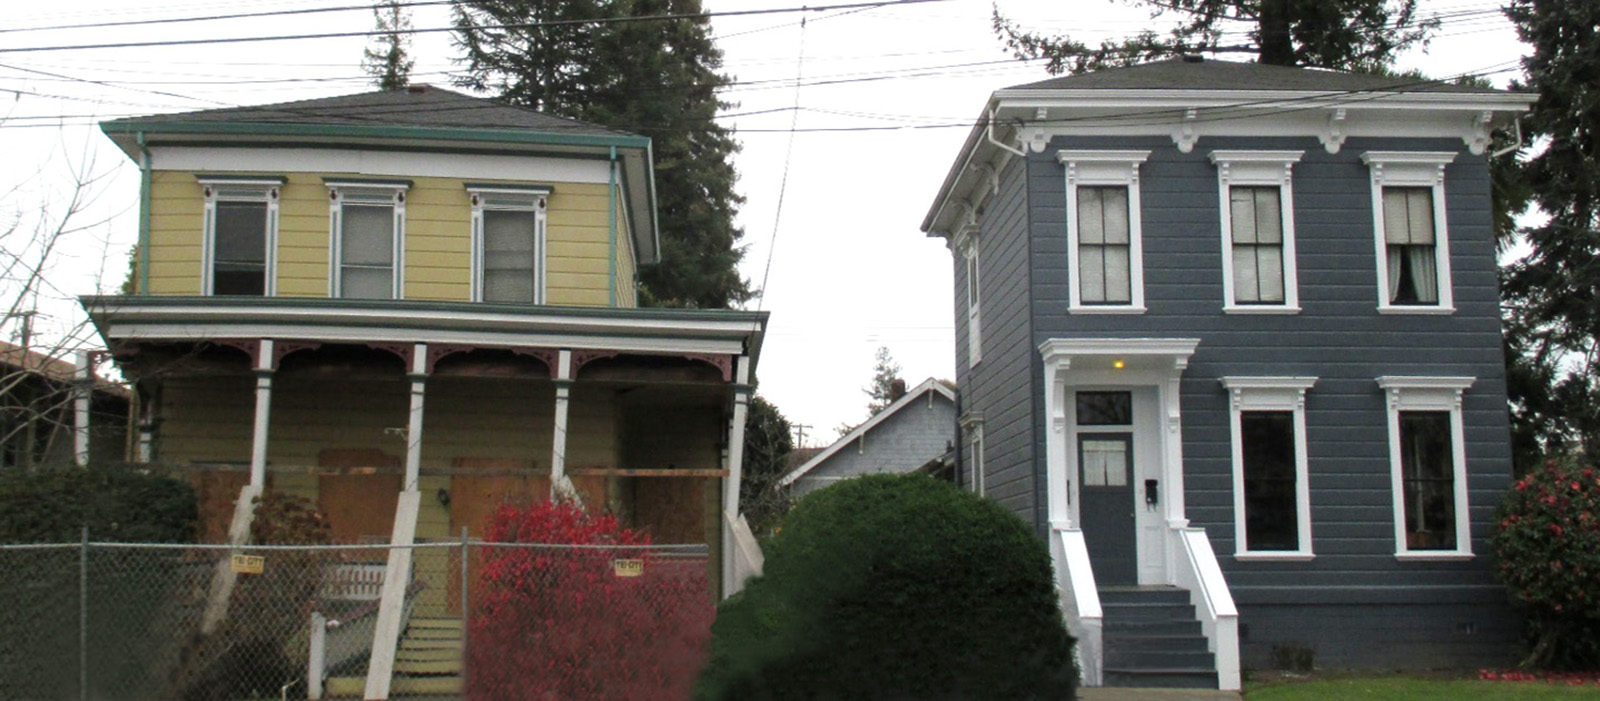 Earthquake seismic retrofit grants now available to more eligible